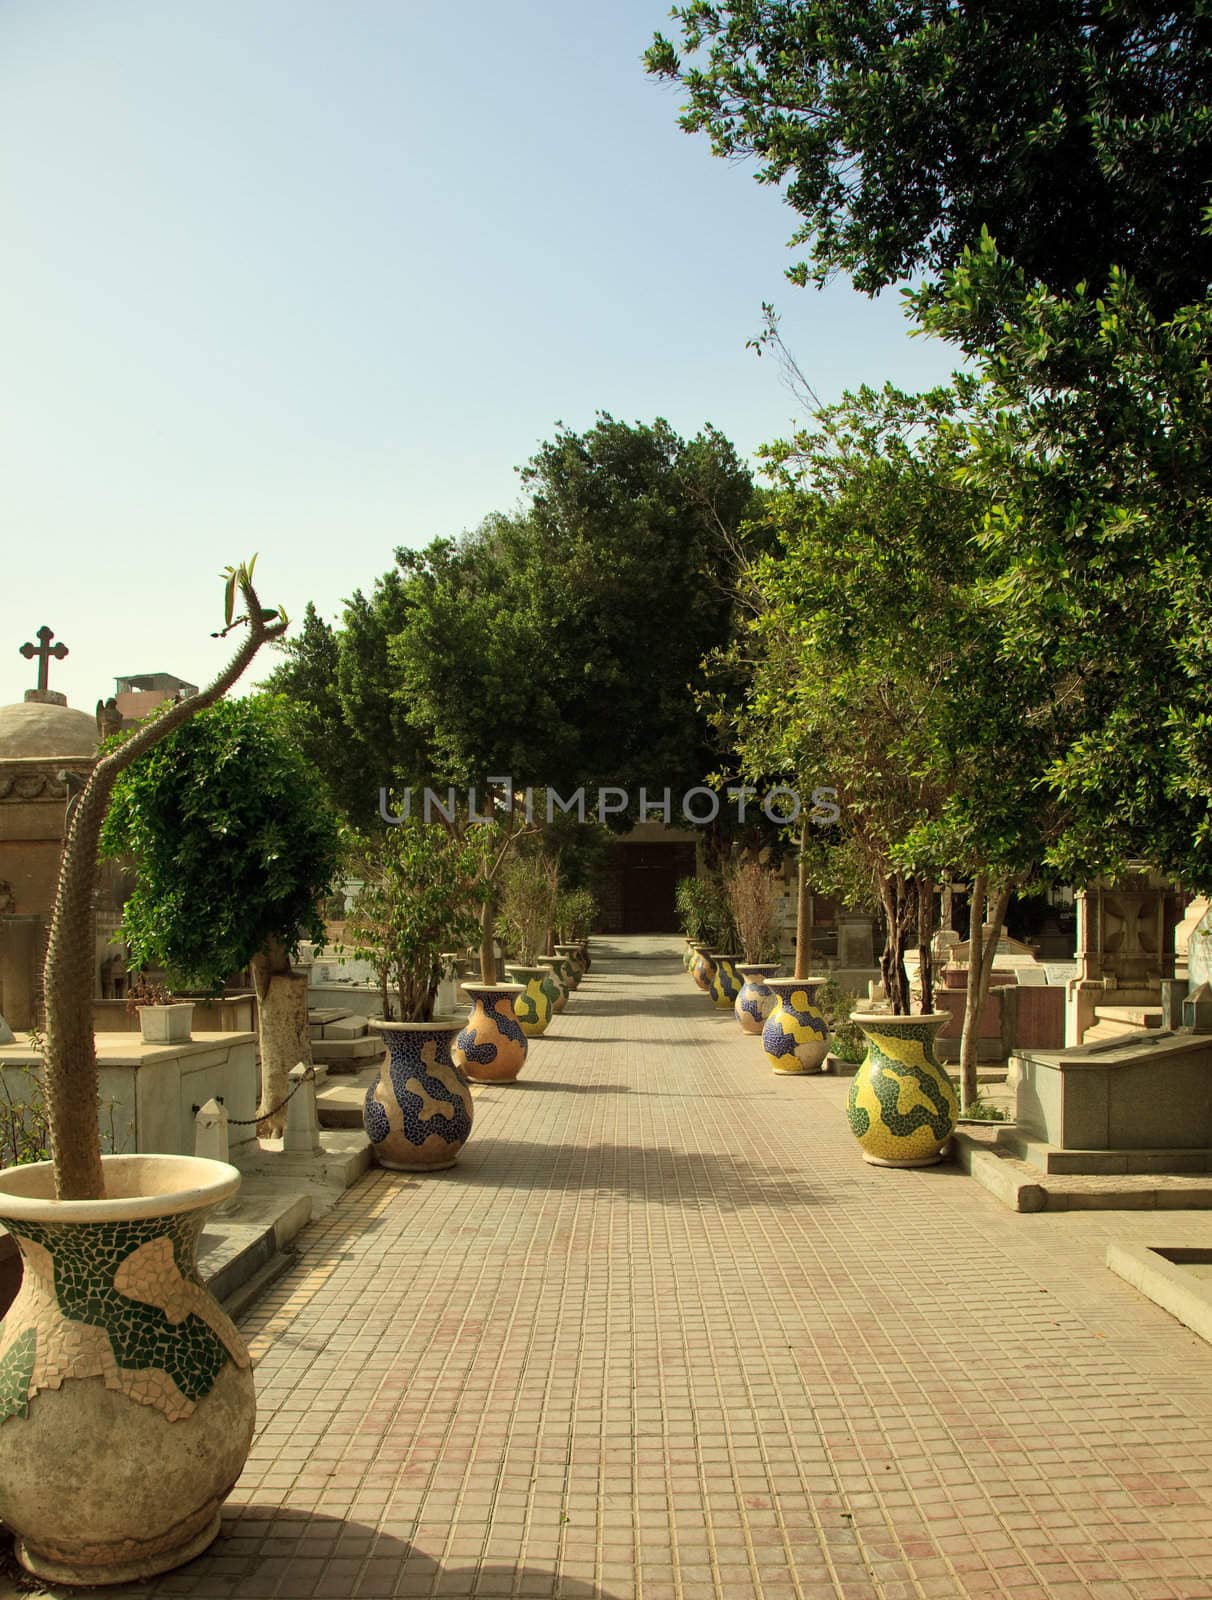 Coptic Christian tombs in Cairo by steheap